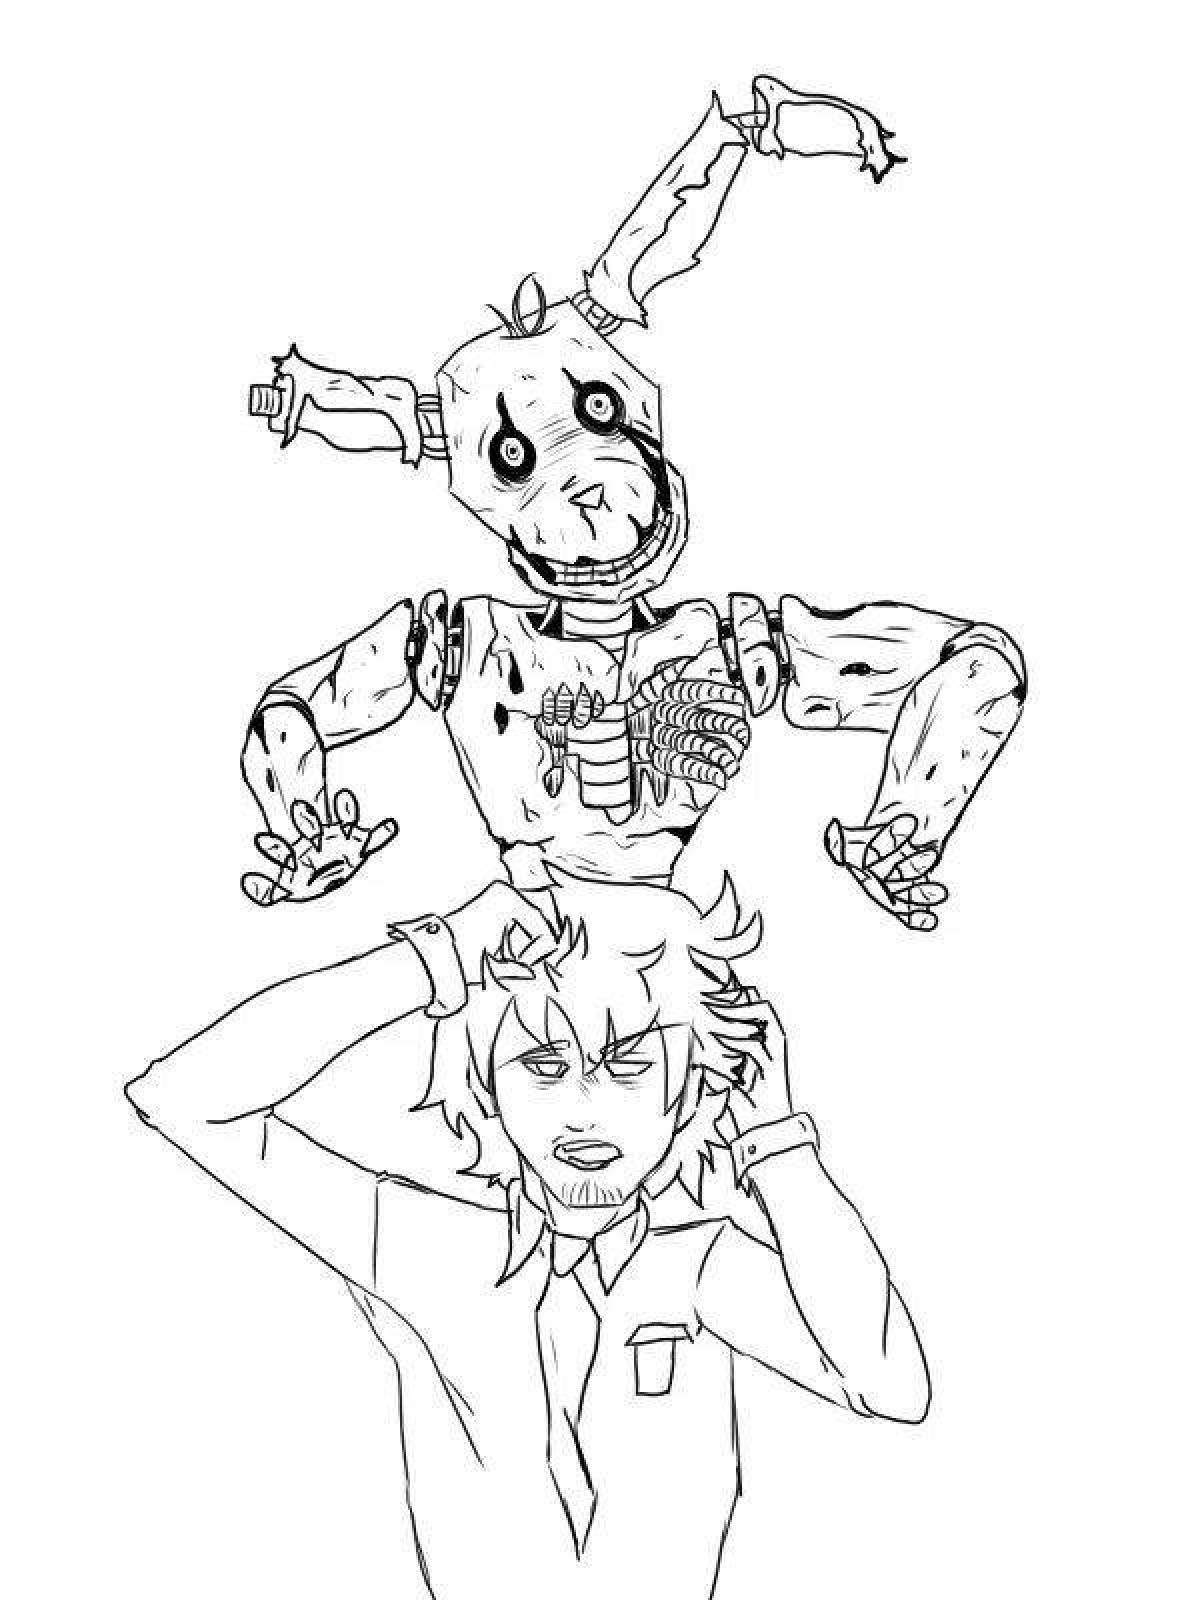 Springtrap live coloring page